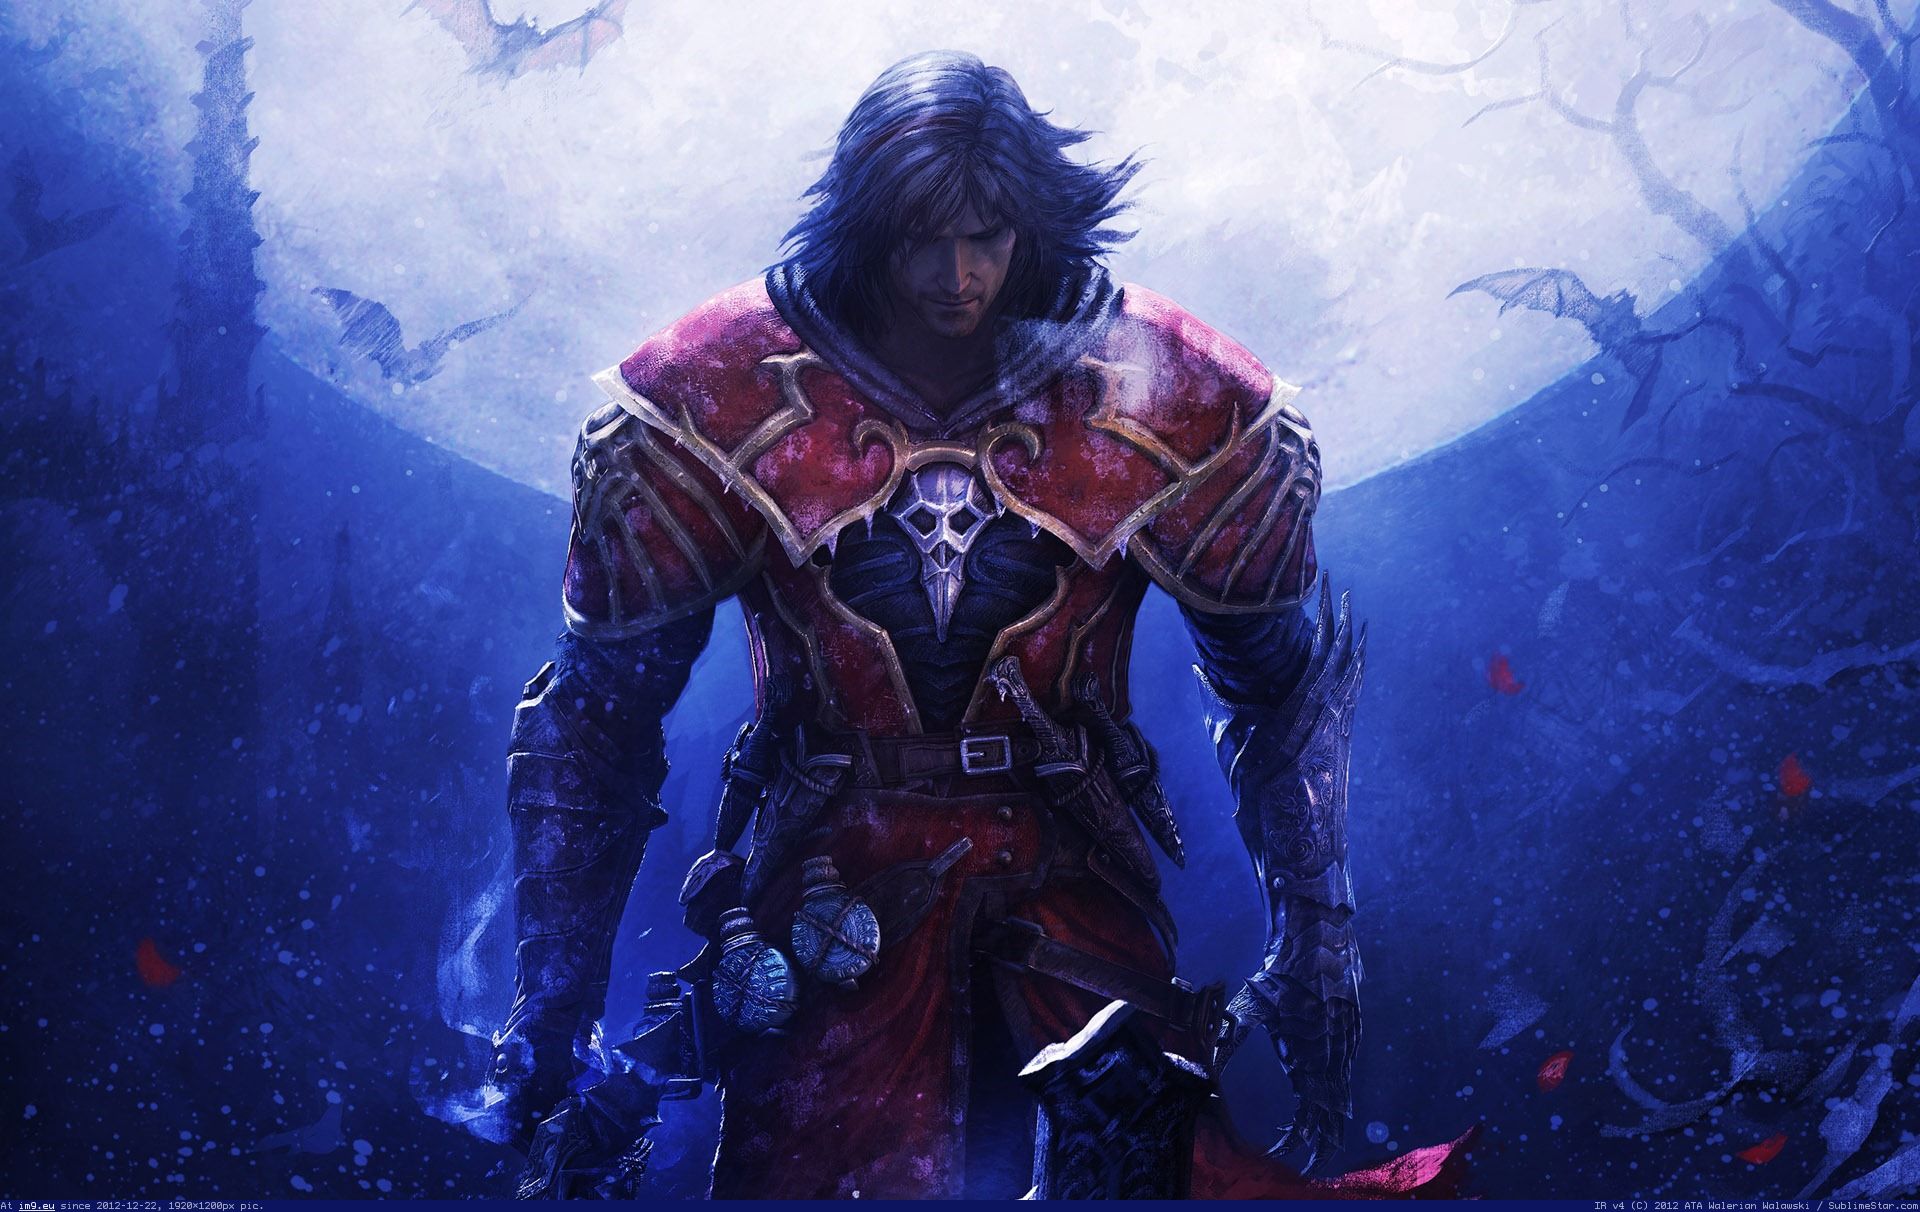 Castlevania Lords Of Shadow 2 Wallpapers in HD